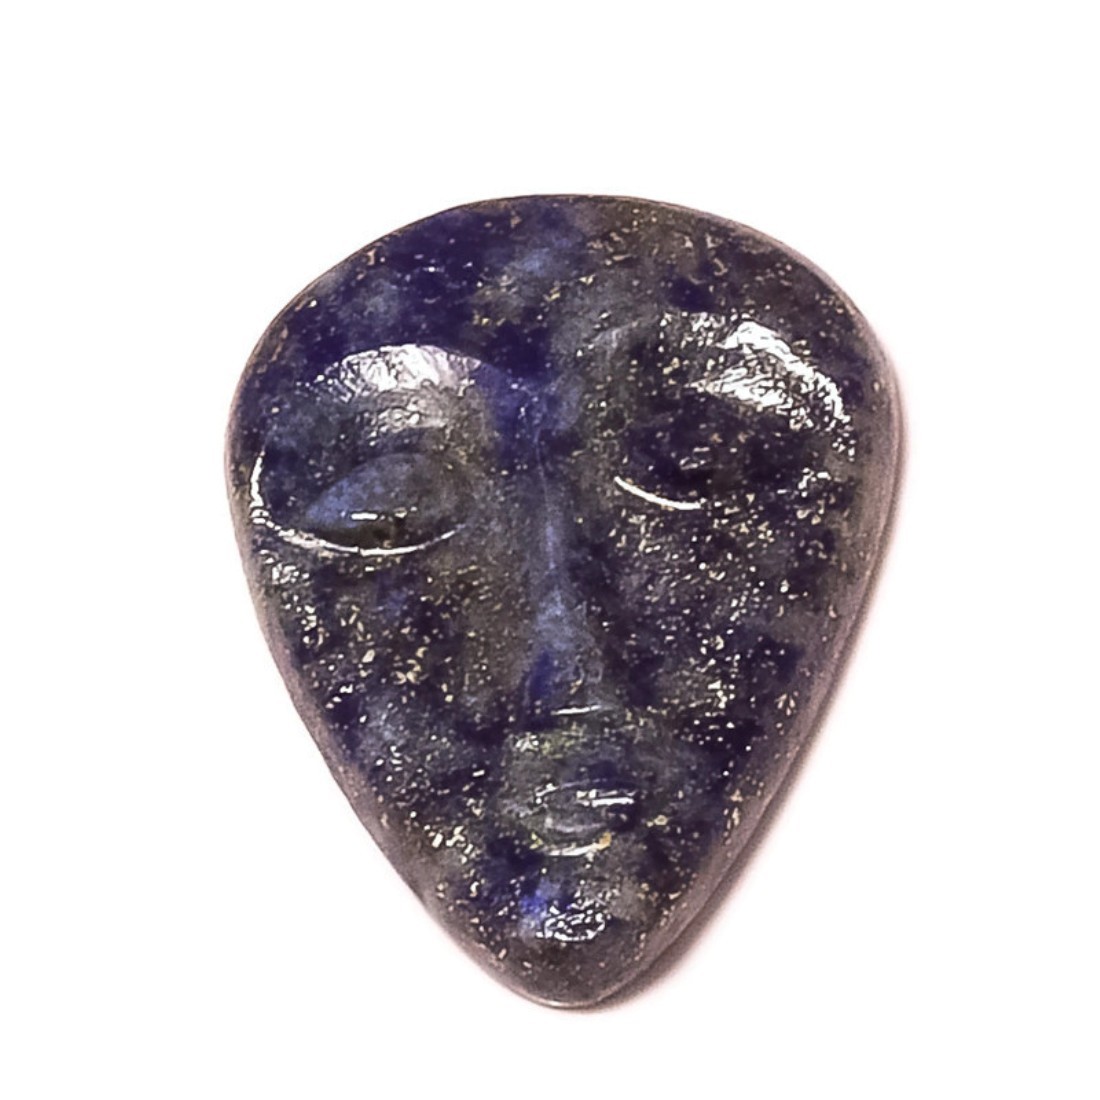 Primary image for 35.85 Cts Lapis Lazuli Hand-Carved Face with Close Eye Stone for Jewelry Making